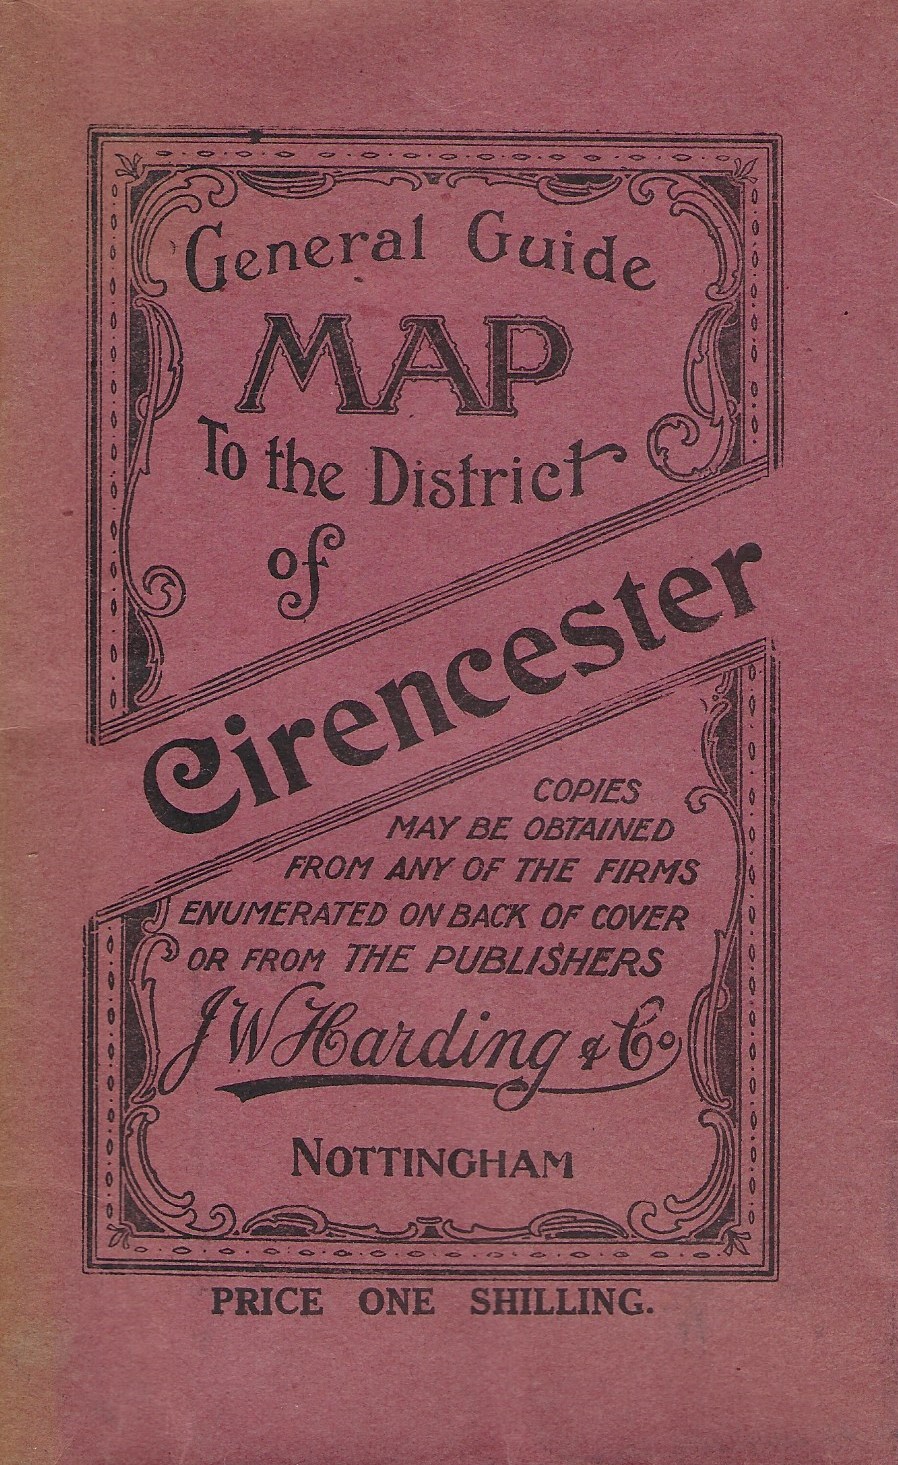 Image for General Guide Map to the District of Cirencester.